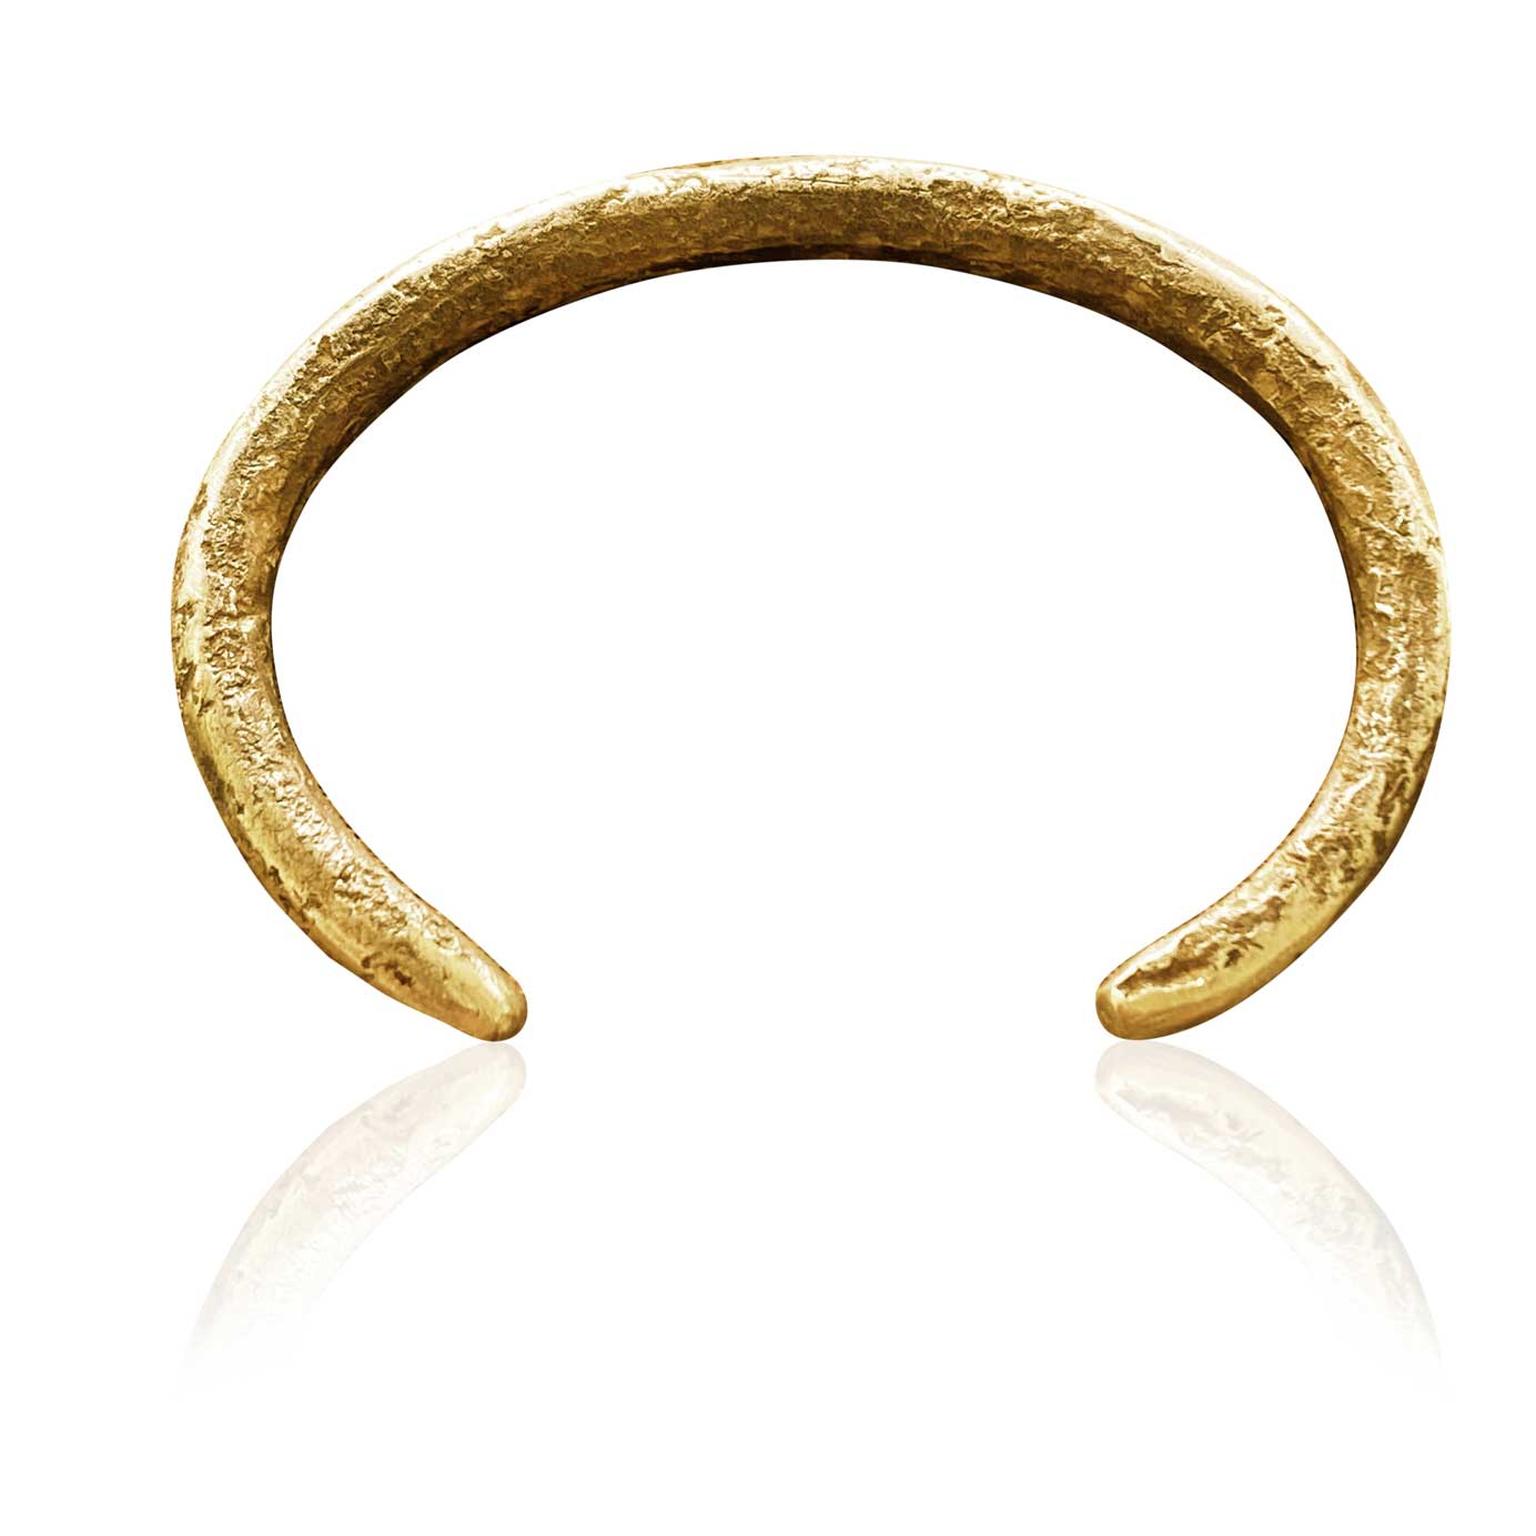 Patrick Mavros Forged by the Ocean gold bangle